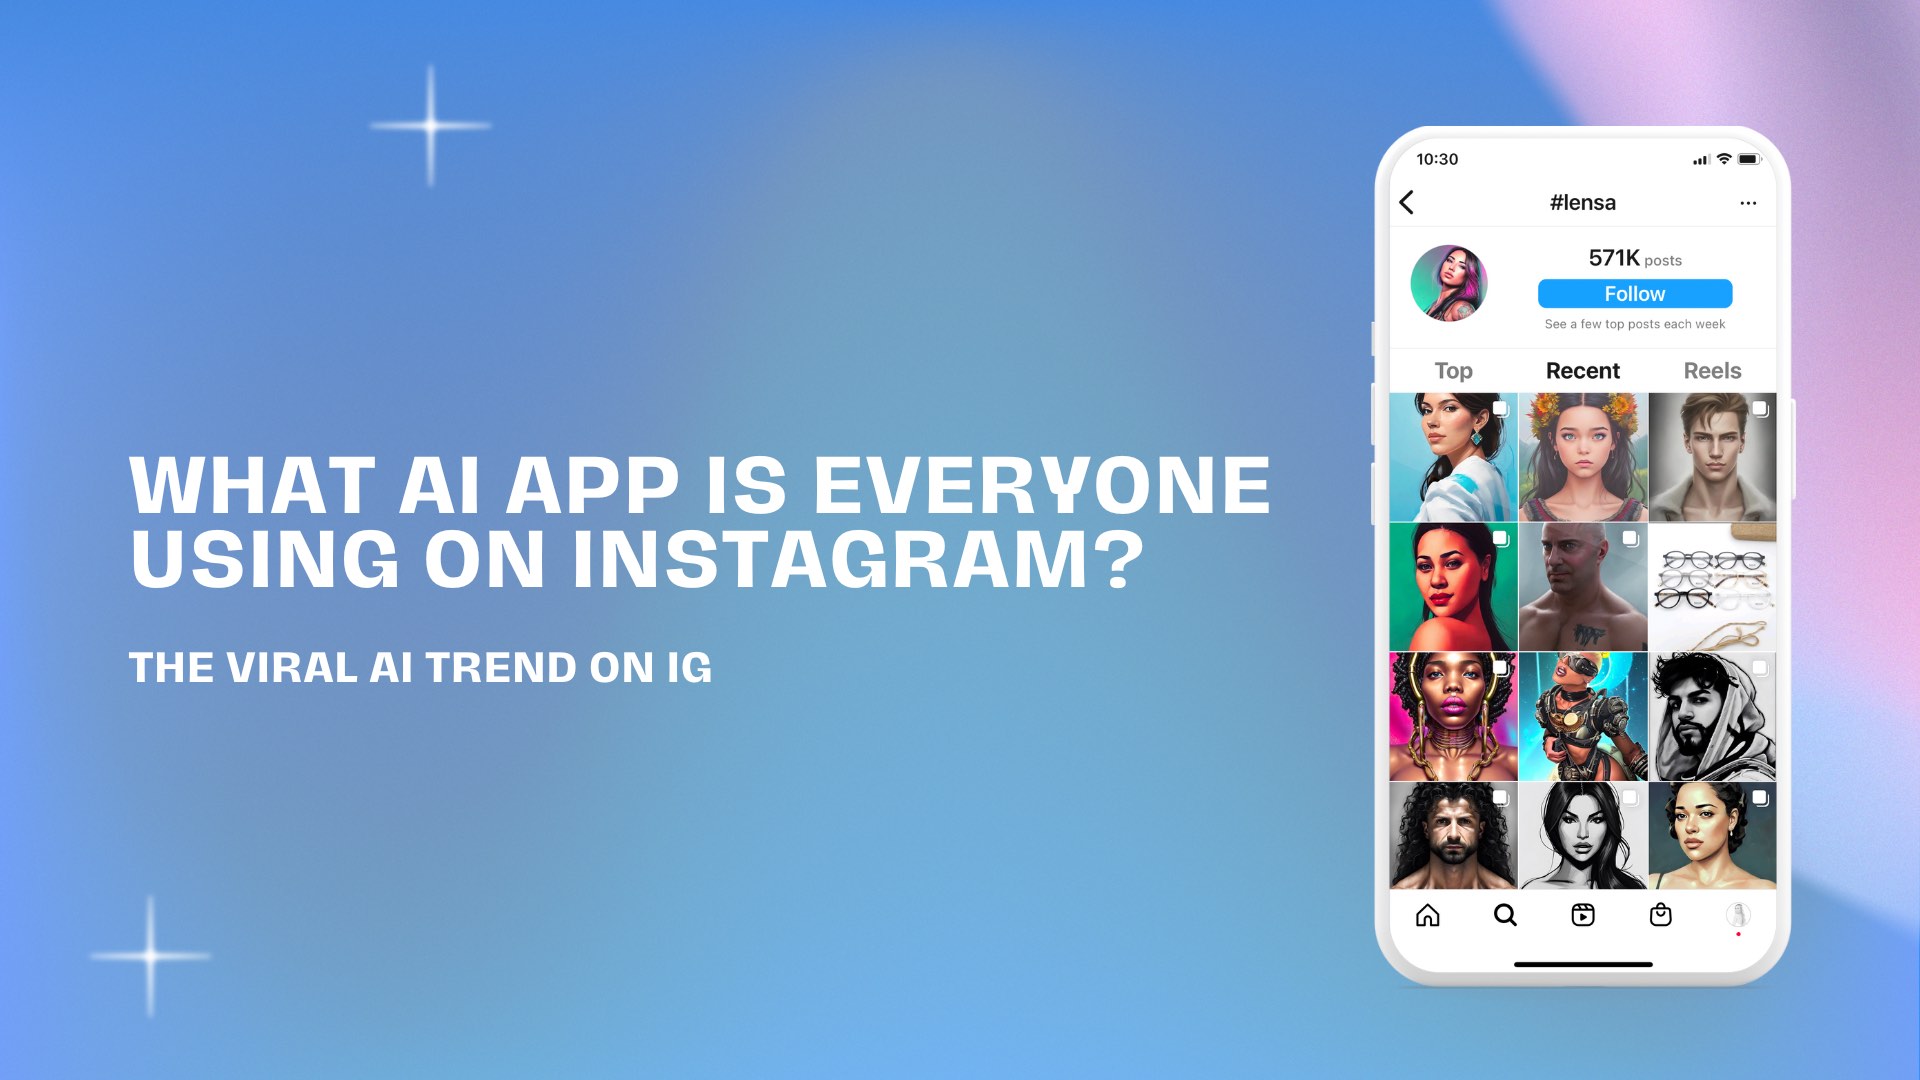 What Ai App Is Everyone Using On Instagram The Viral Trend Ig Vista Social